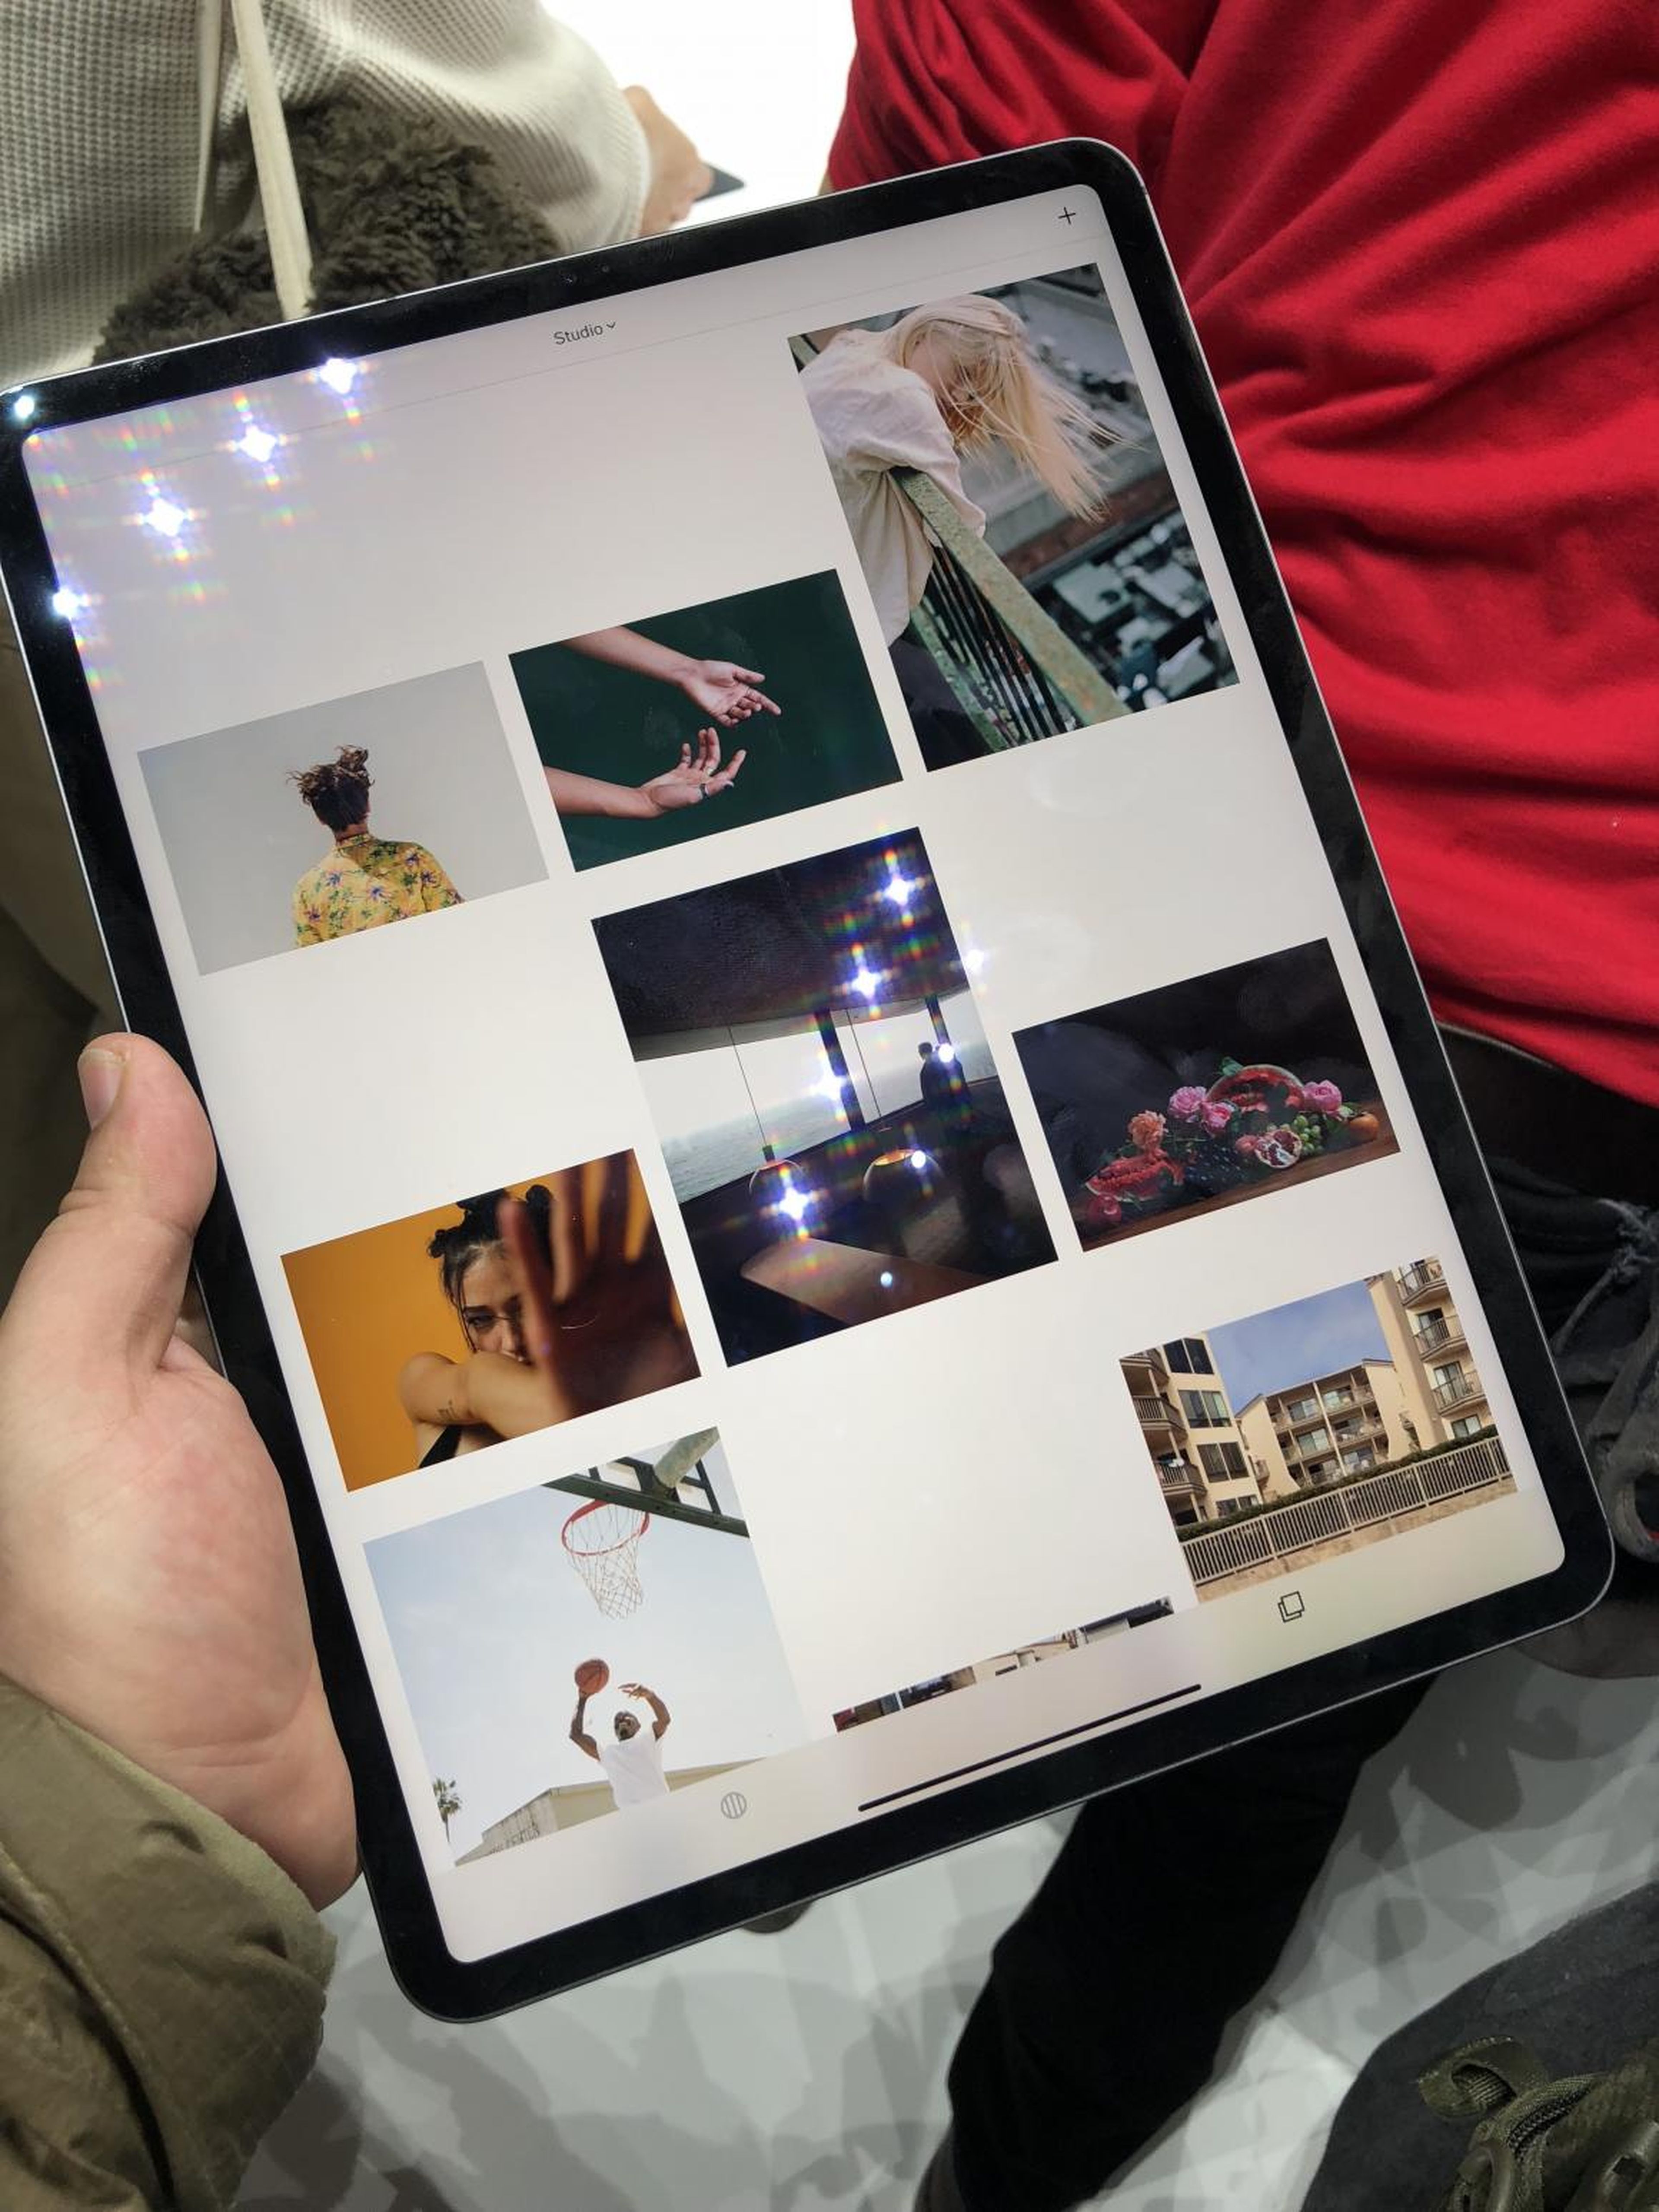 You can pack a ton of content on its 12.9" screen, though. This is VSCO, a photo app.